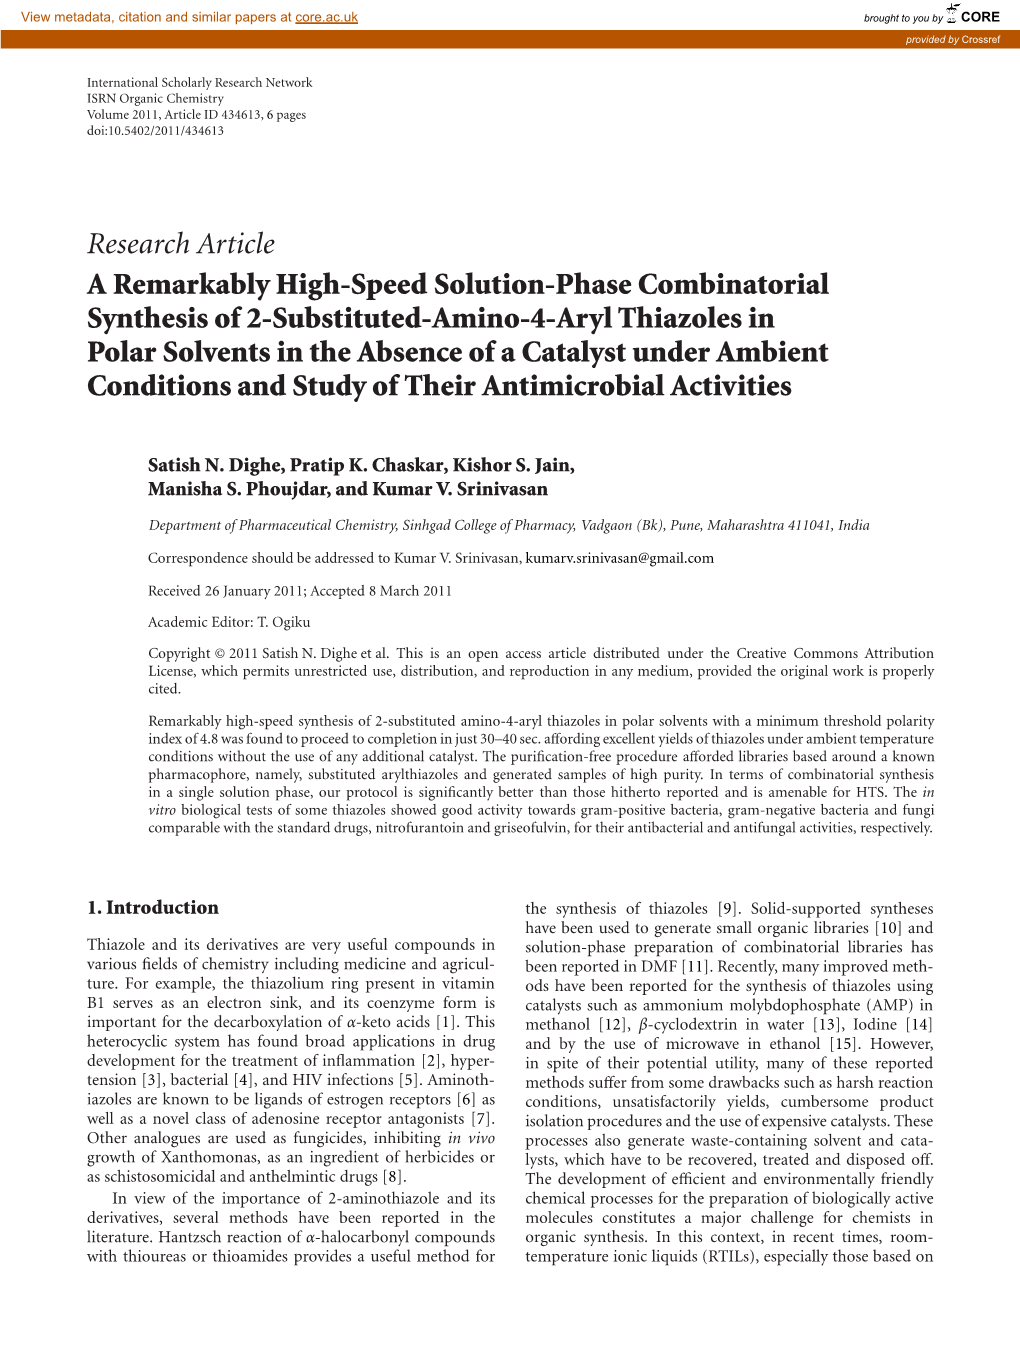 Research Article a Remarkably High-Speed Solution-Phase